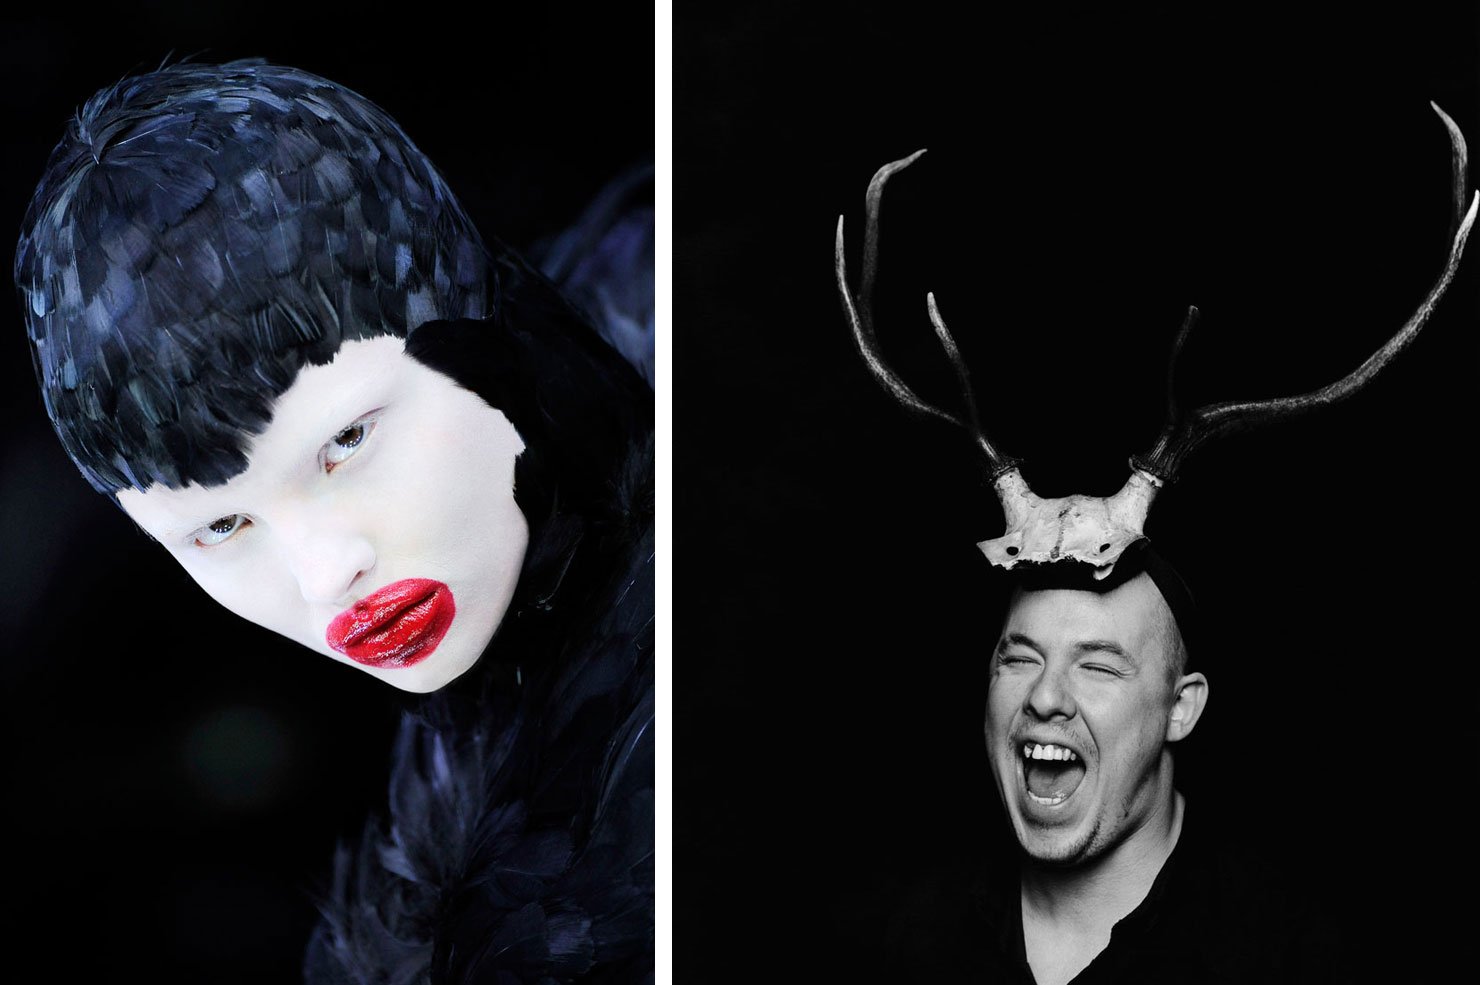 Alexander McQueen Savage Beauty at the V&A. Portrait of Alexander McQueen, photographed by Marc Hom.